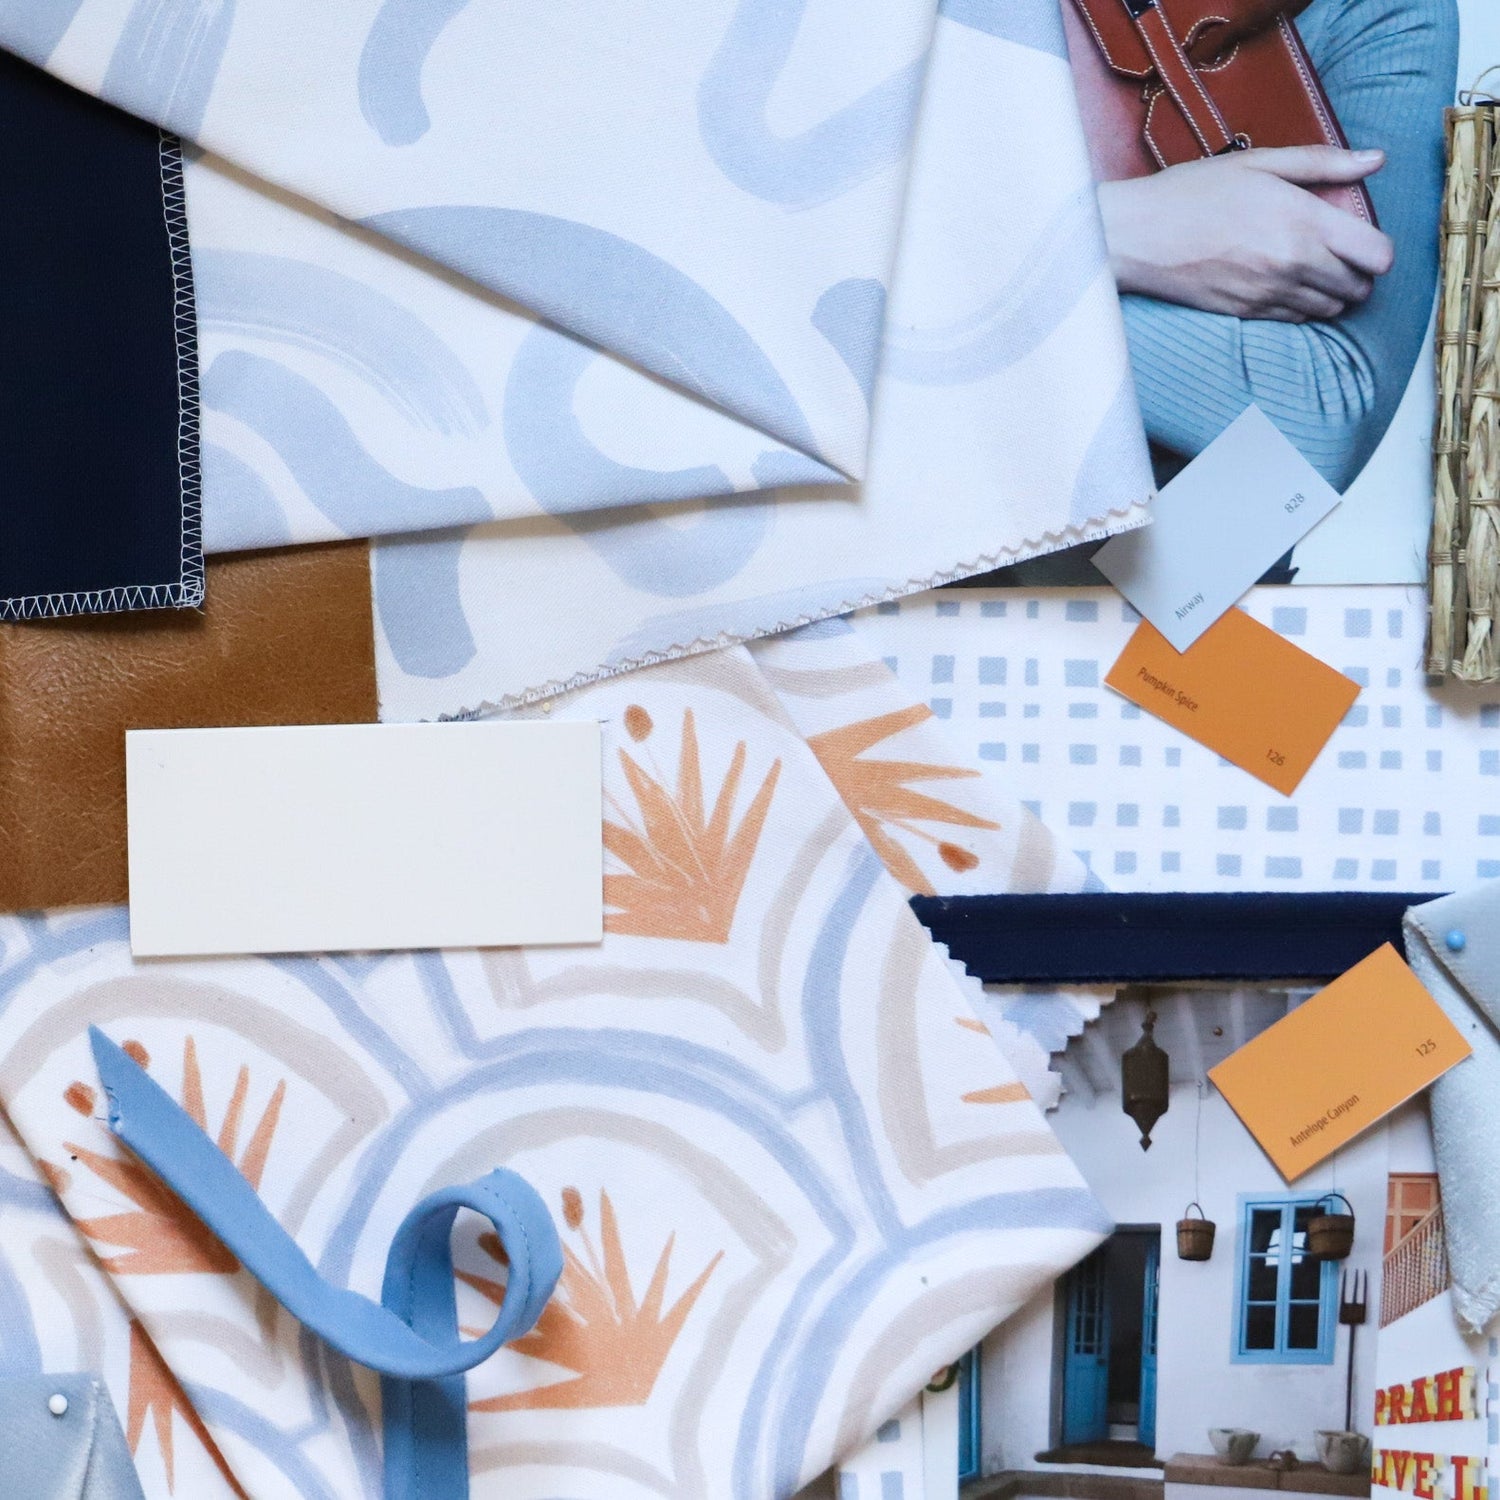 Interior design moodboard and fabric inspirations with Sky Blue Printed Swatch, Navy Blue Swatch, and Art Deco Palm Pattern Printed Swatch